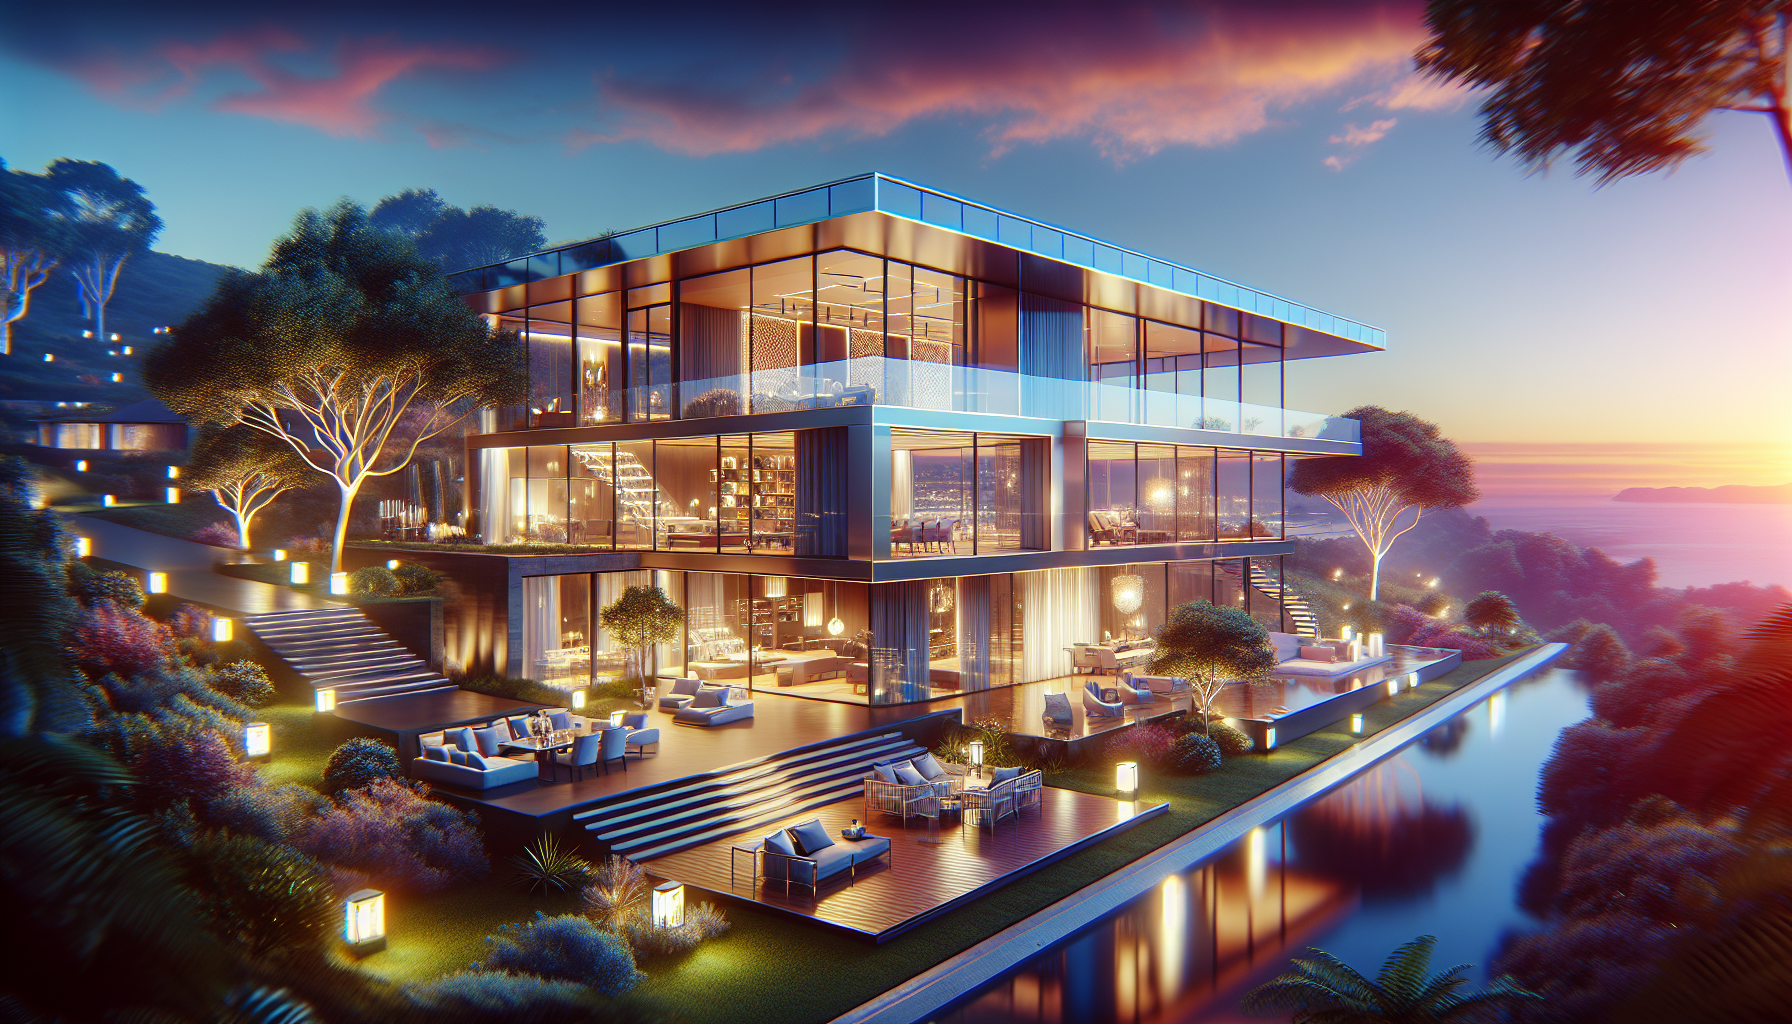 Create an image of a sleek and modern luxury home with floor-to-ceiling windows, high-end furnishings, and an expansive outdoor patio with a stunning view. The image should capture a sense of opulence